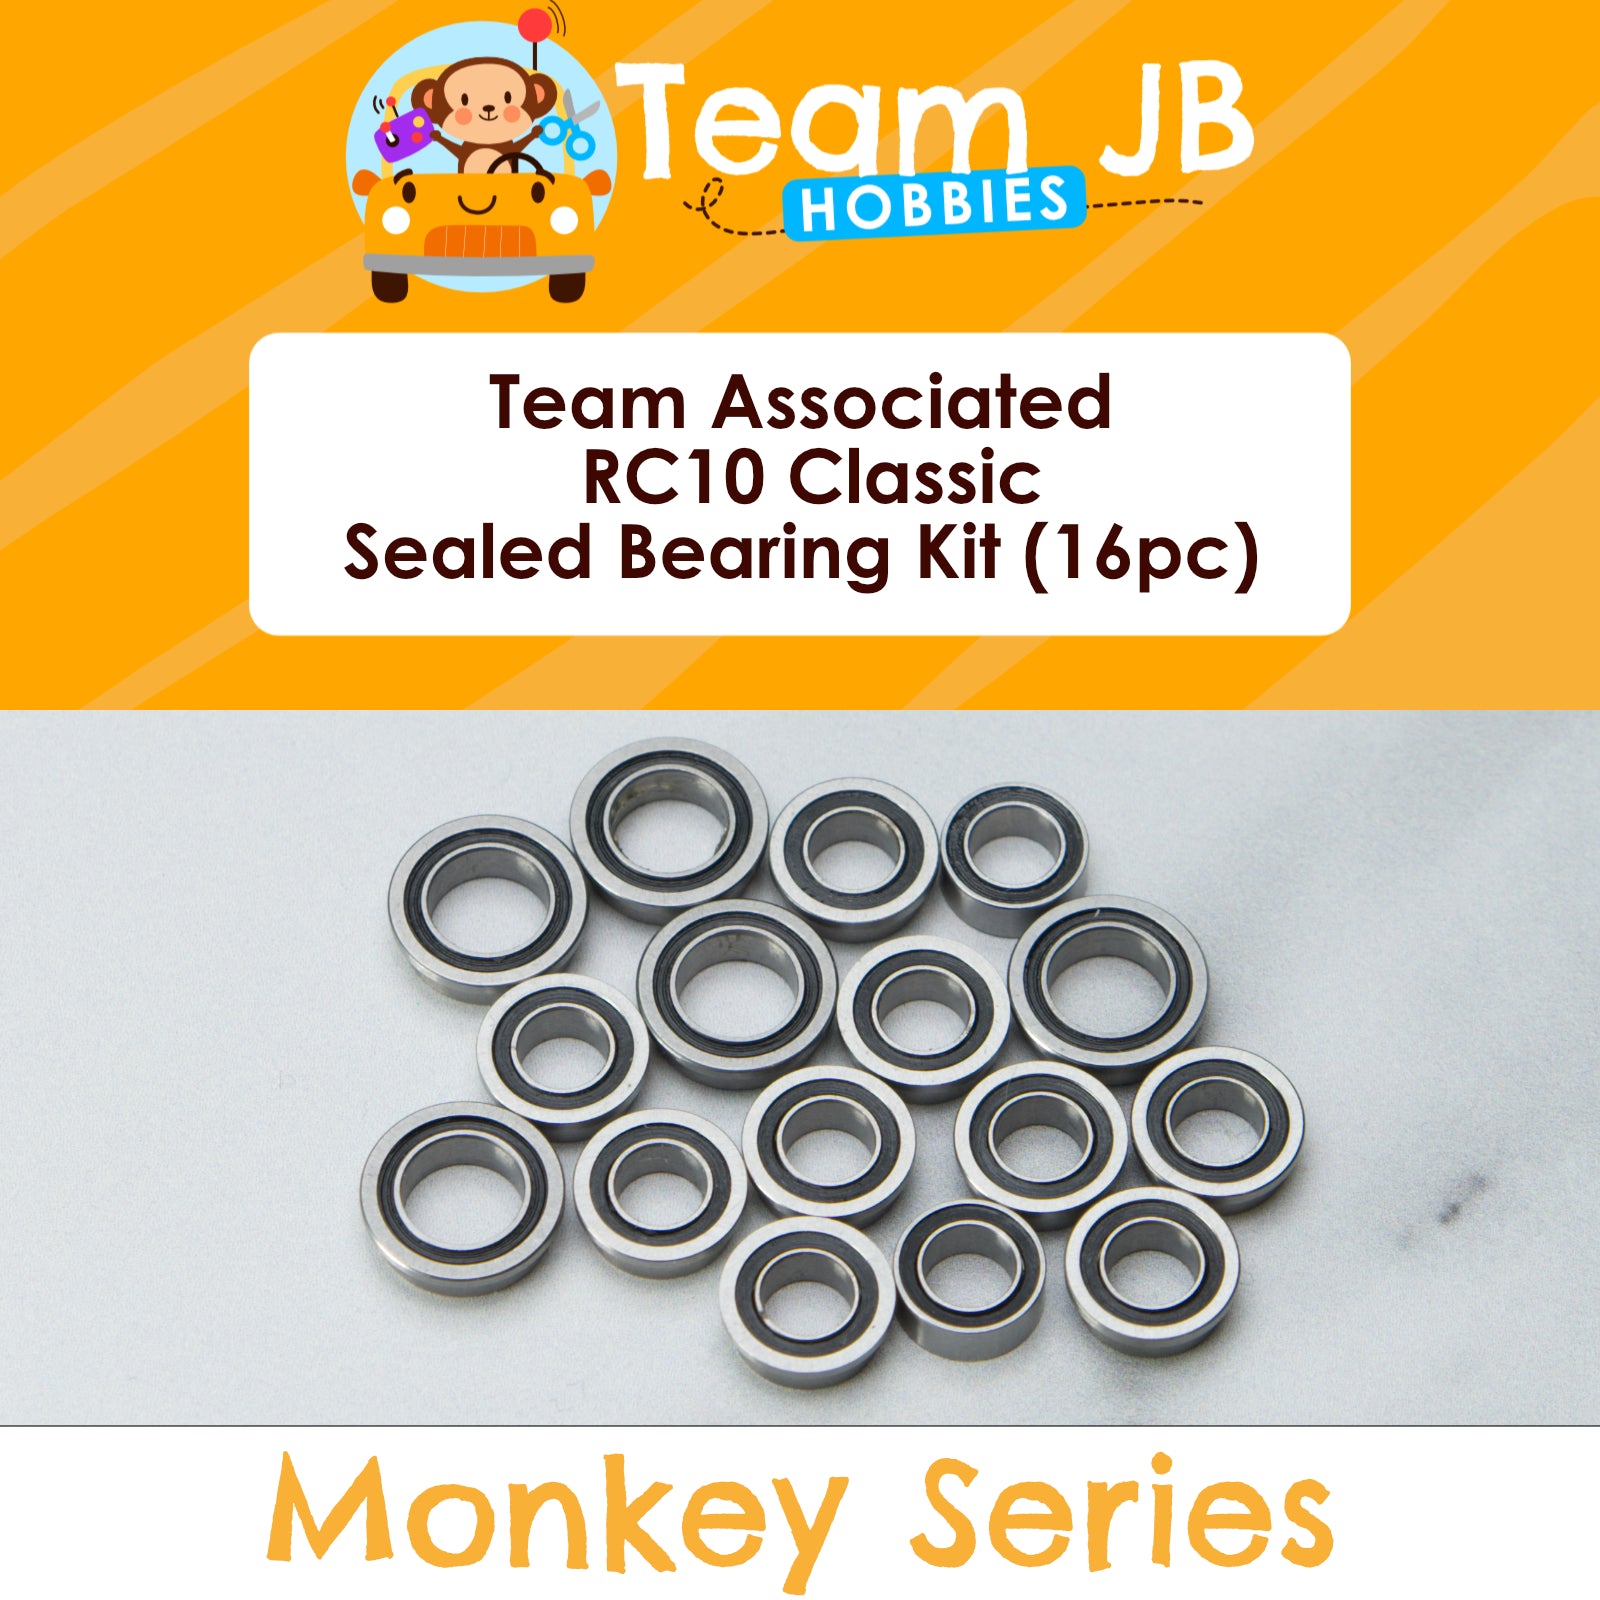 Team Associated RC10 Classic, RC10CC Classic Clear - Sealed Bearing Kit